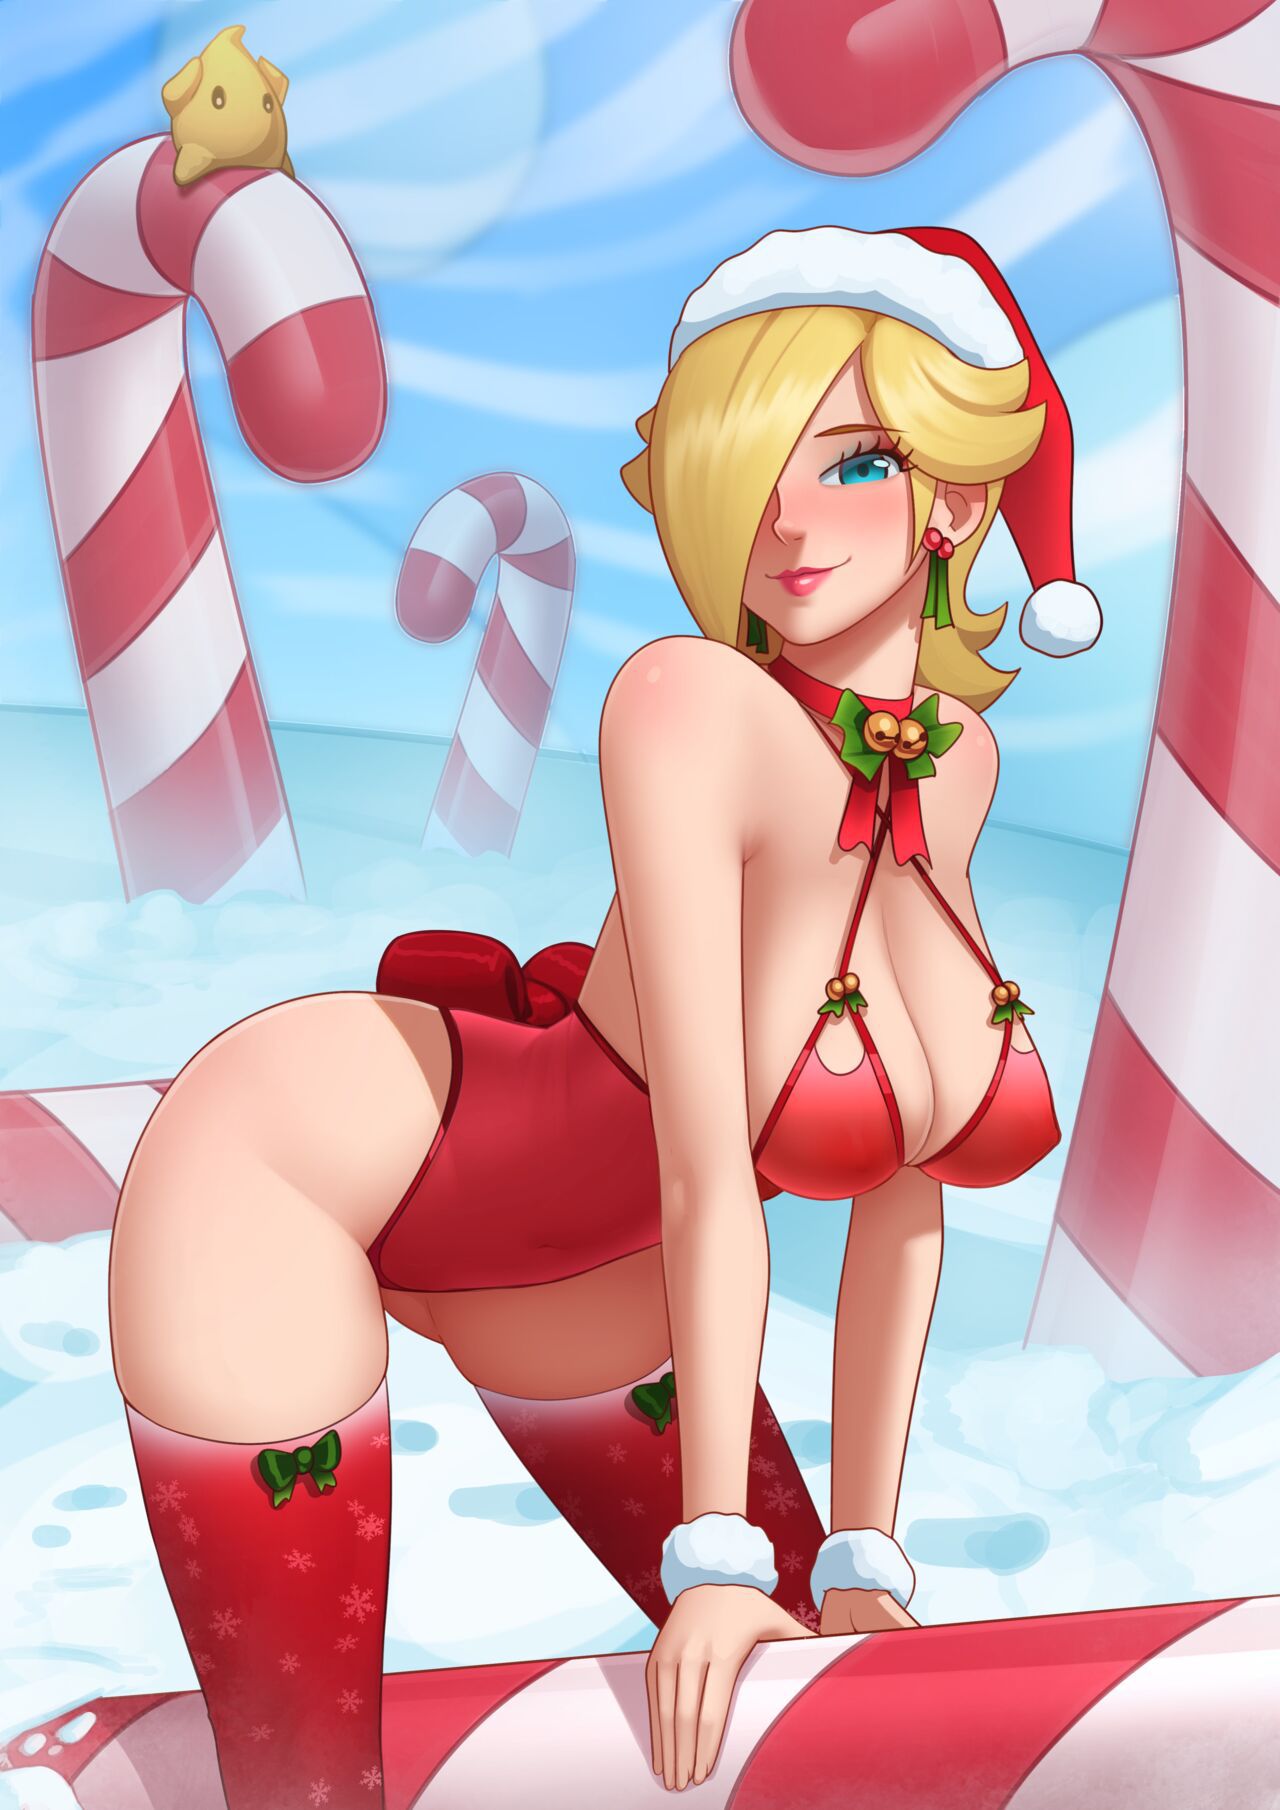 [Deilan12] Candy Canes Appeared 6